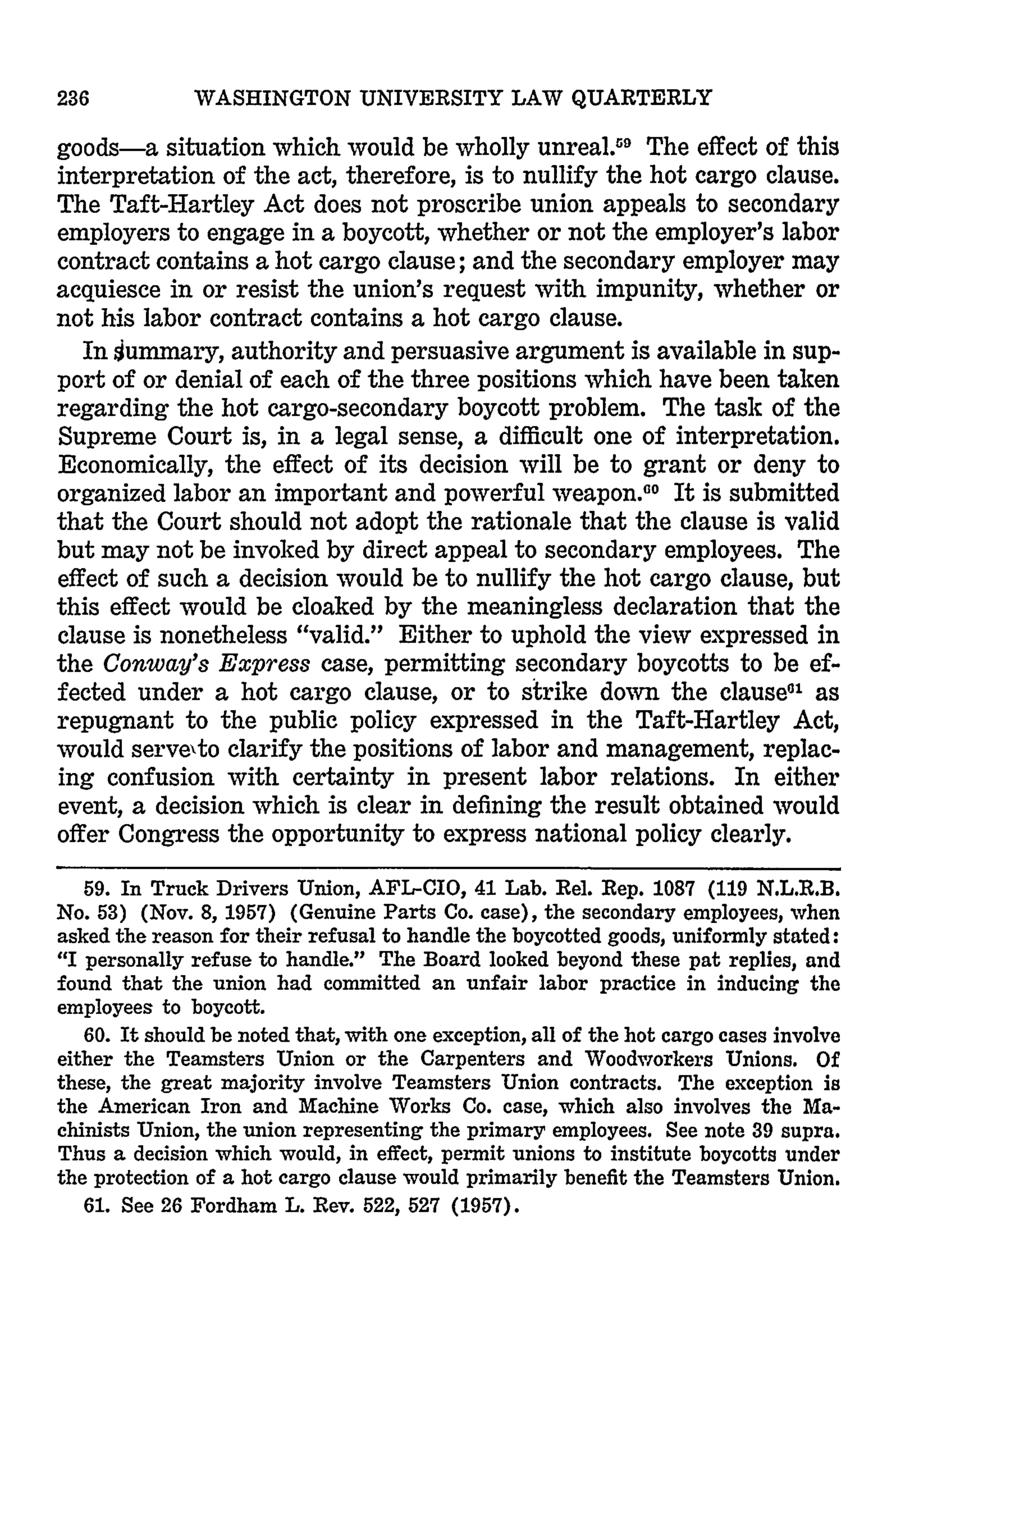 WASHINGTON UNIVERSITY LAW QUARTERLY goods-a situation which would be wholly unreal.5 9 The effect of this interpretation of the act, therefore, is to nullify the hot cargo clause.